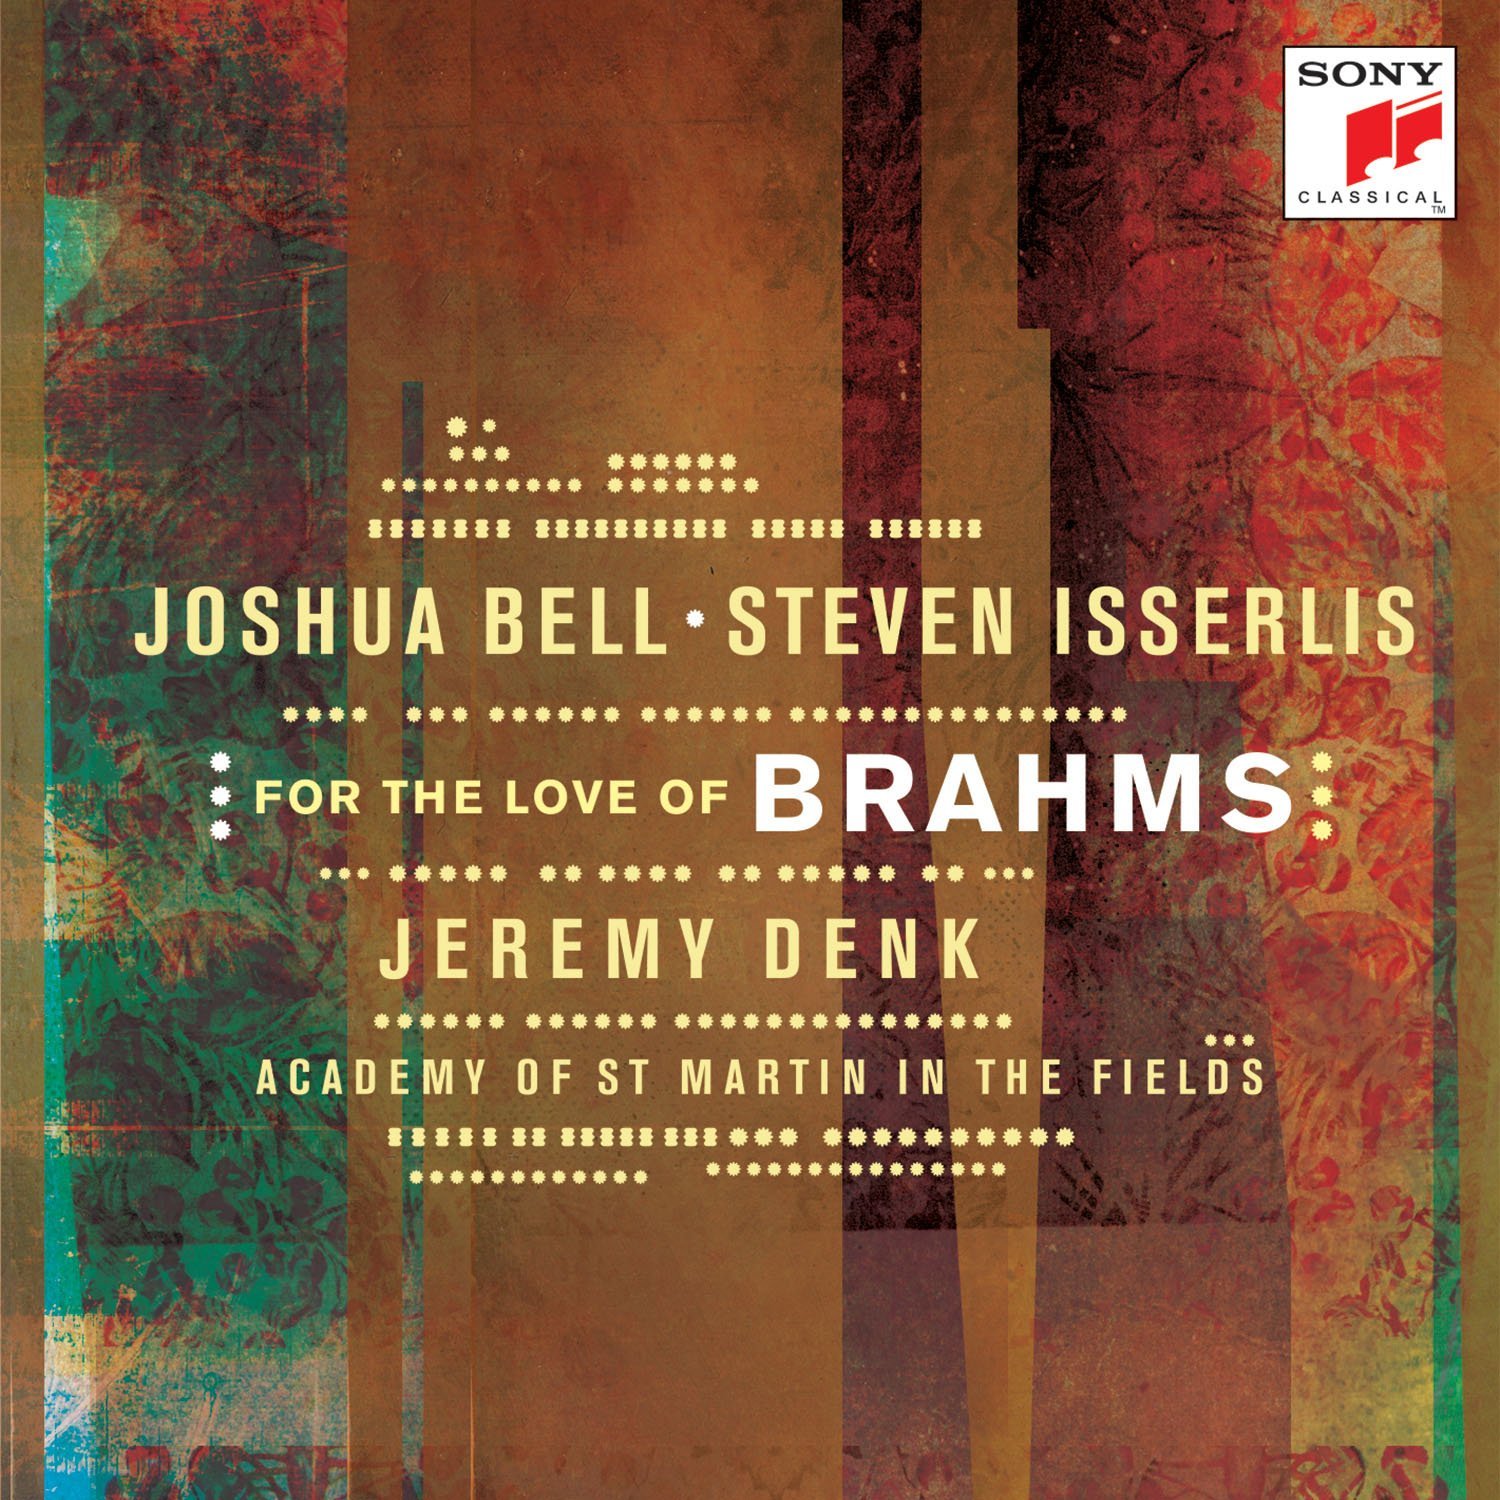 For The Love Of Brahms | Joshua Bell, Steven Isserlis, Jeremy Denk, Academy of St Martin in the Fields